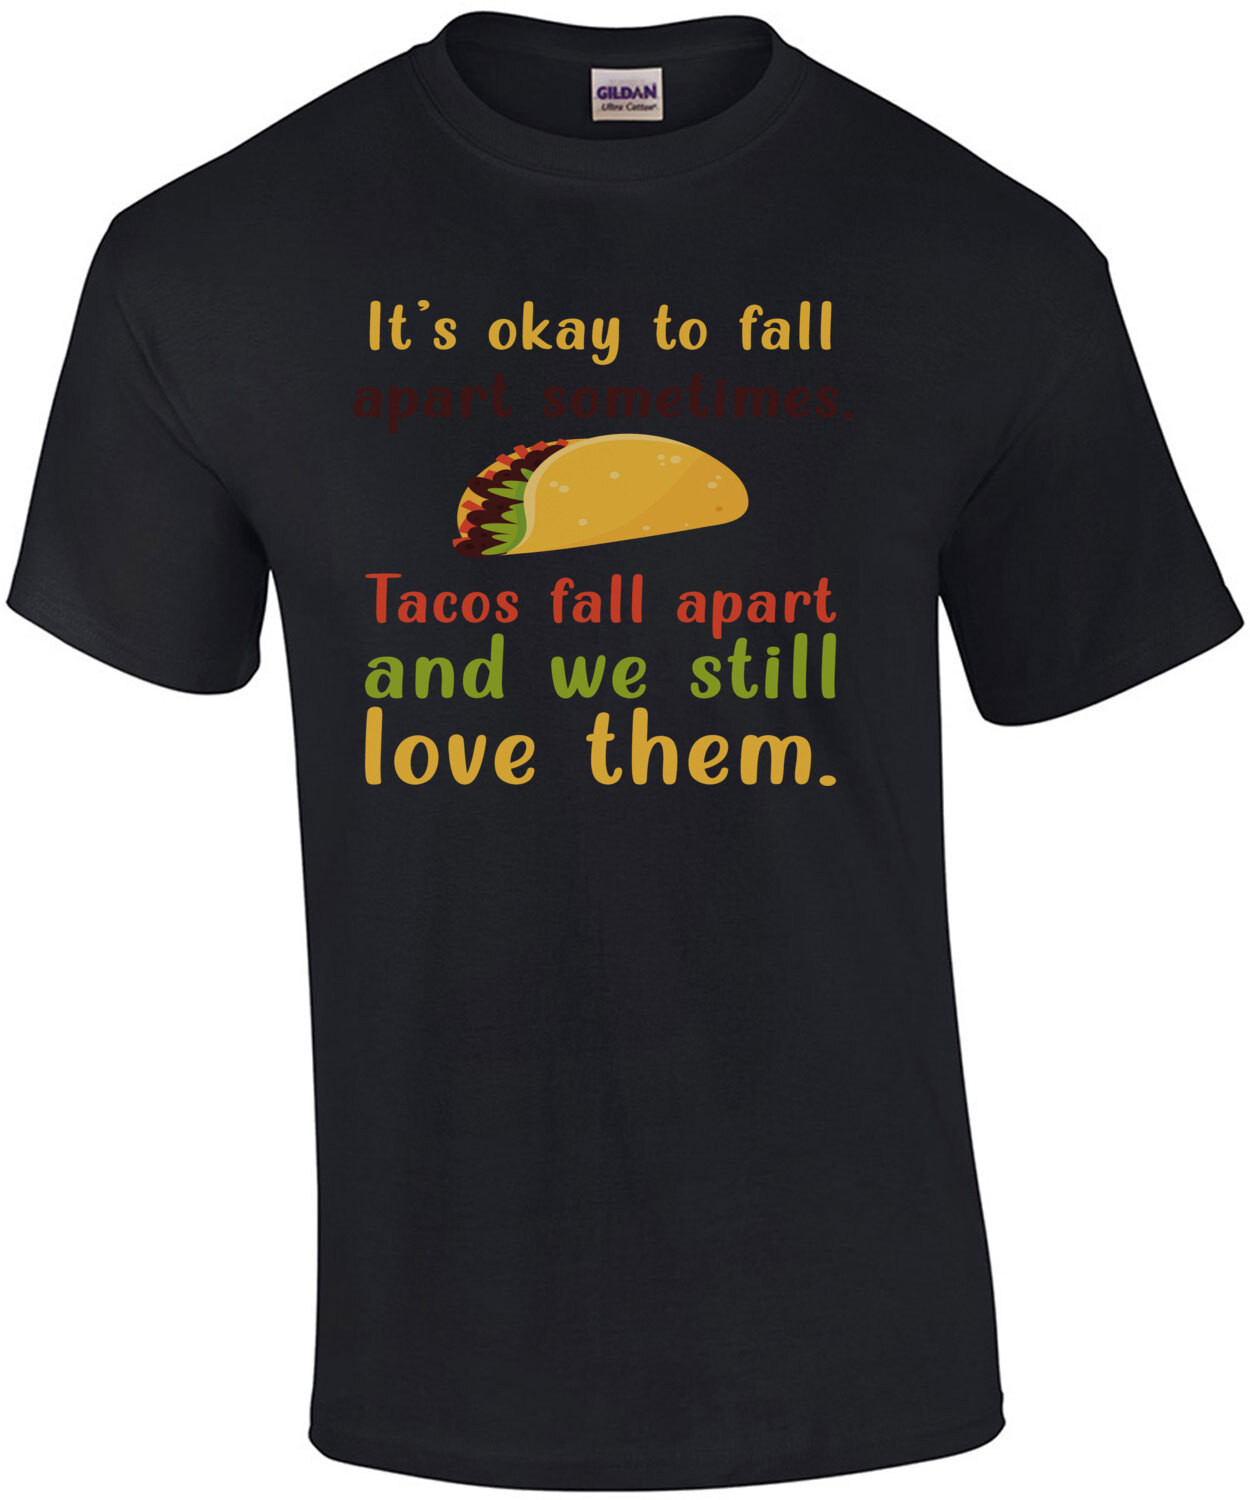 It's ok to fall apart sometimes. Tacos fall apart and we still love them. Funny taco t-shirt